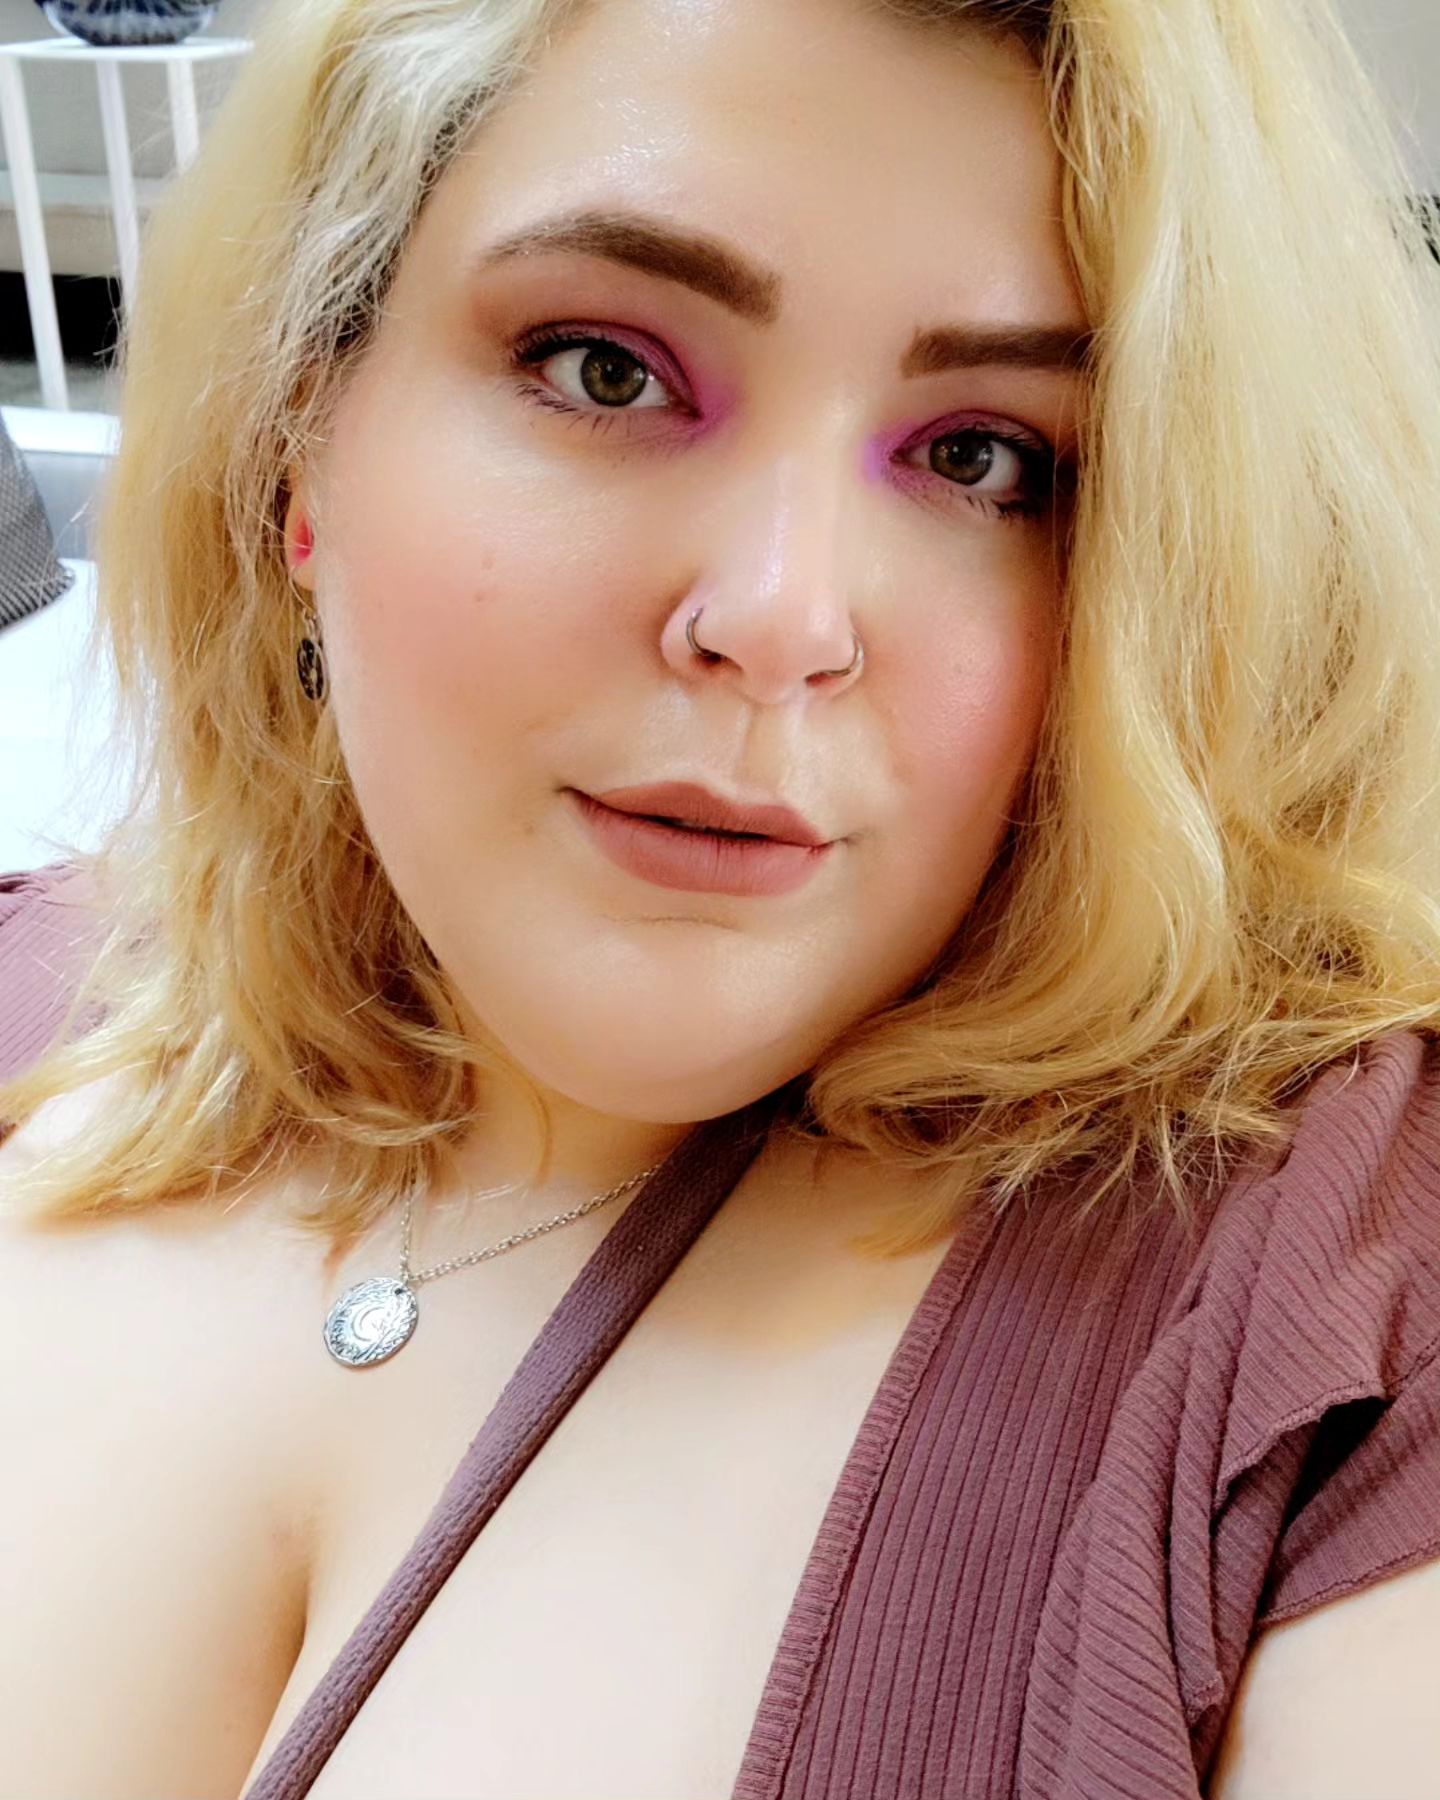 A little Saturday outing. Feels good to get out of town for a little while ✨️